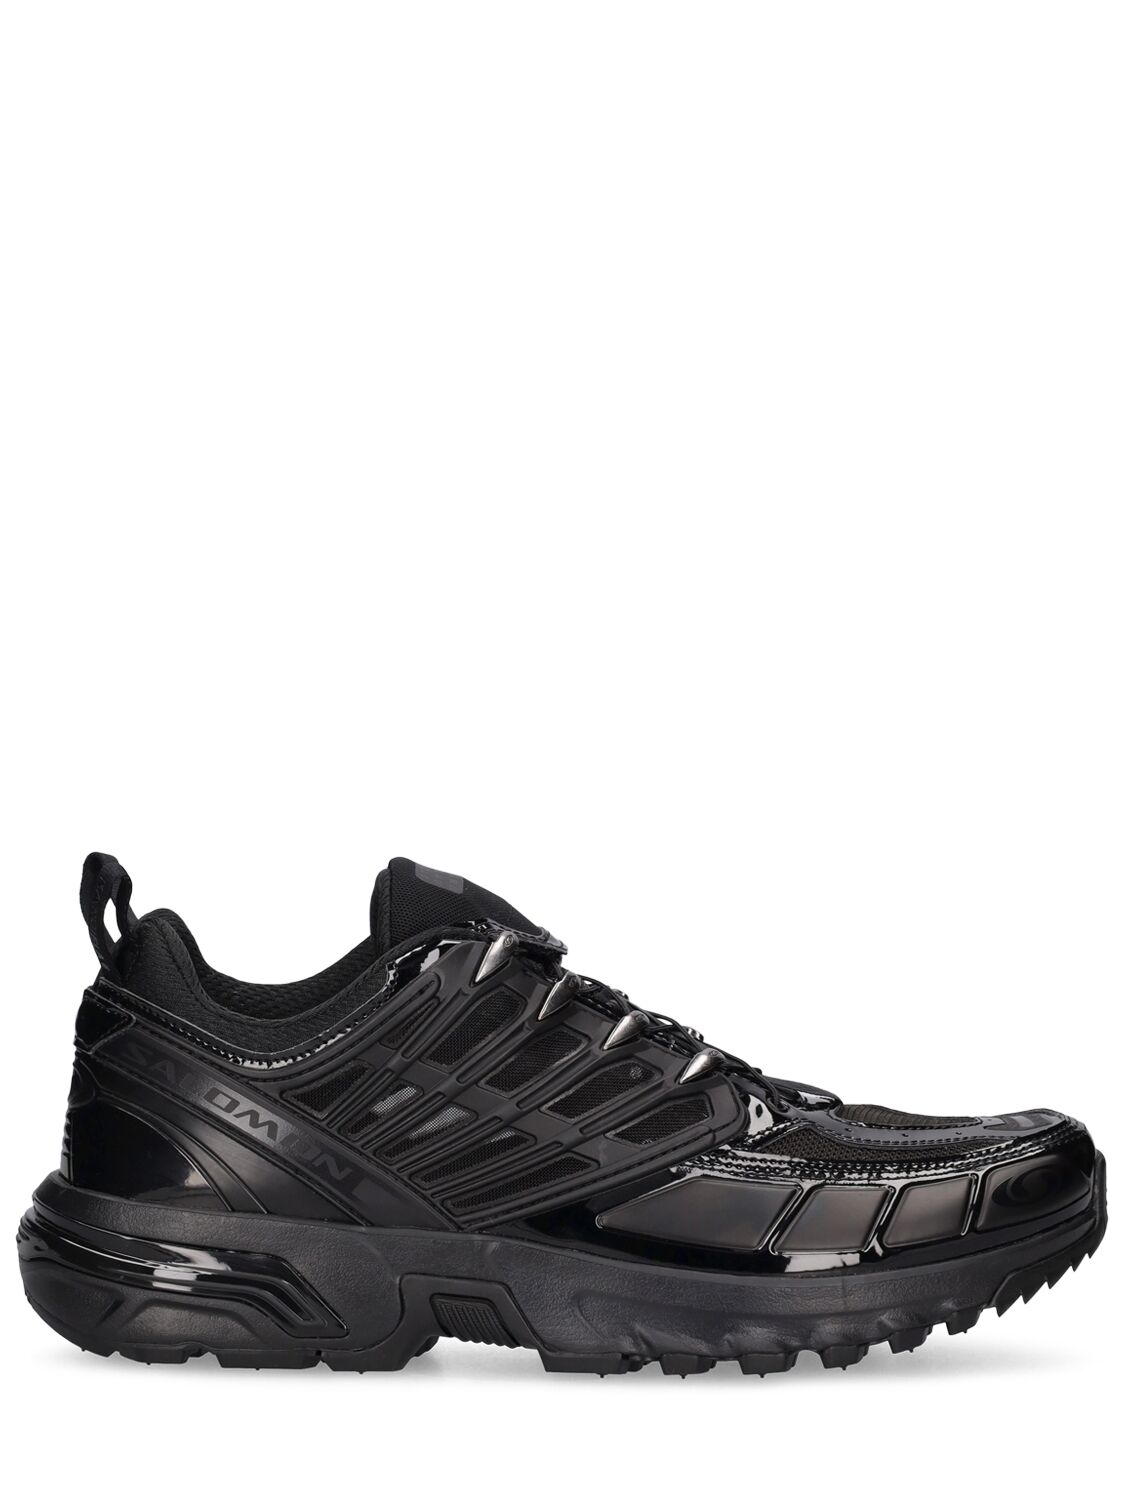 Mm6 Maison Margiela Acs Pro Colourblock Caged Runner Trainers In Black